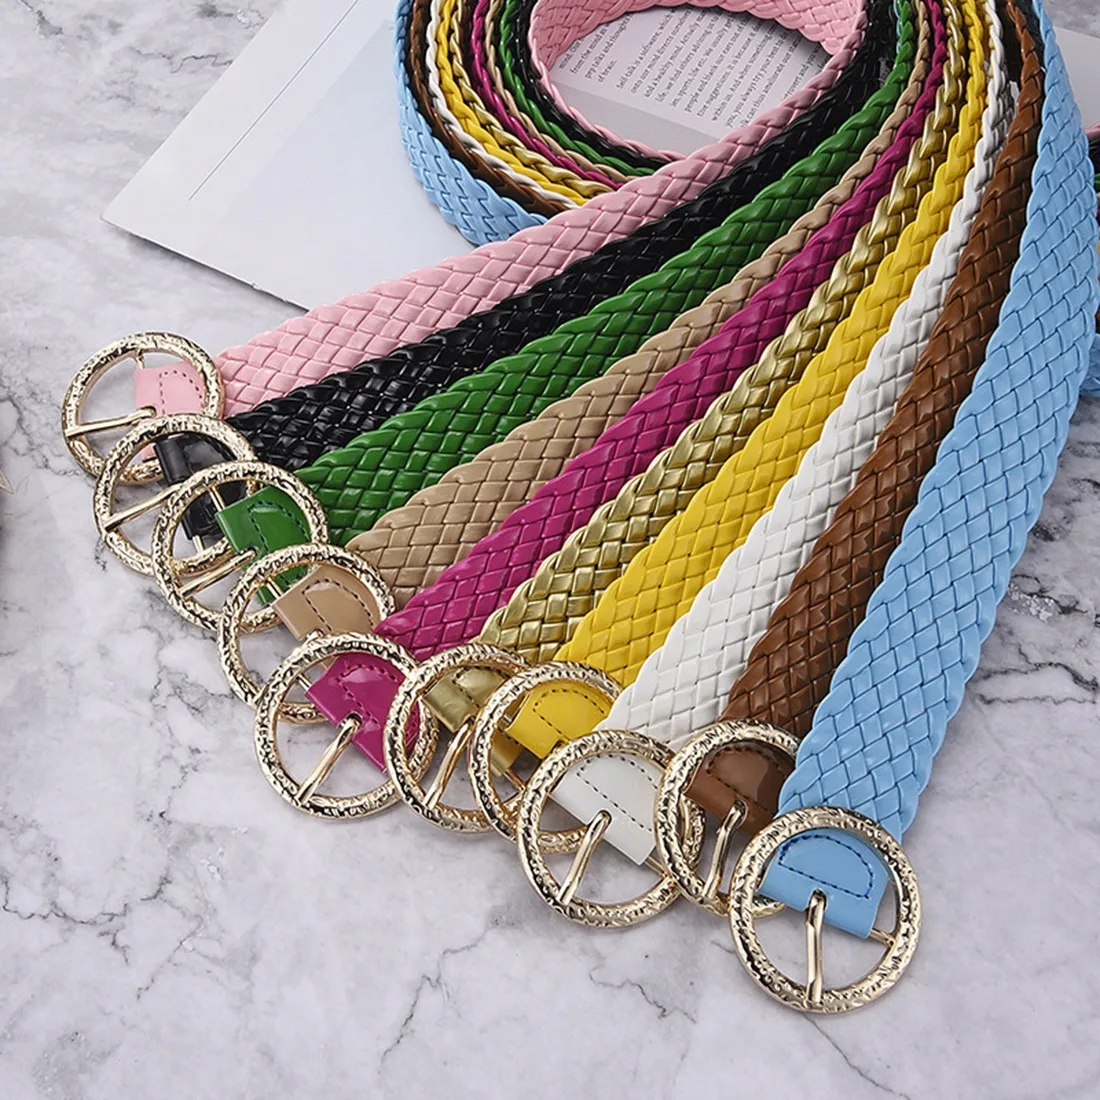 2023 New Fashion Women Braided Bright Colors Belts Ladies Waist Ornament No Holes All Matching